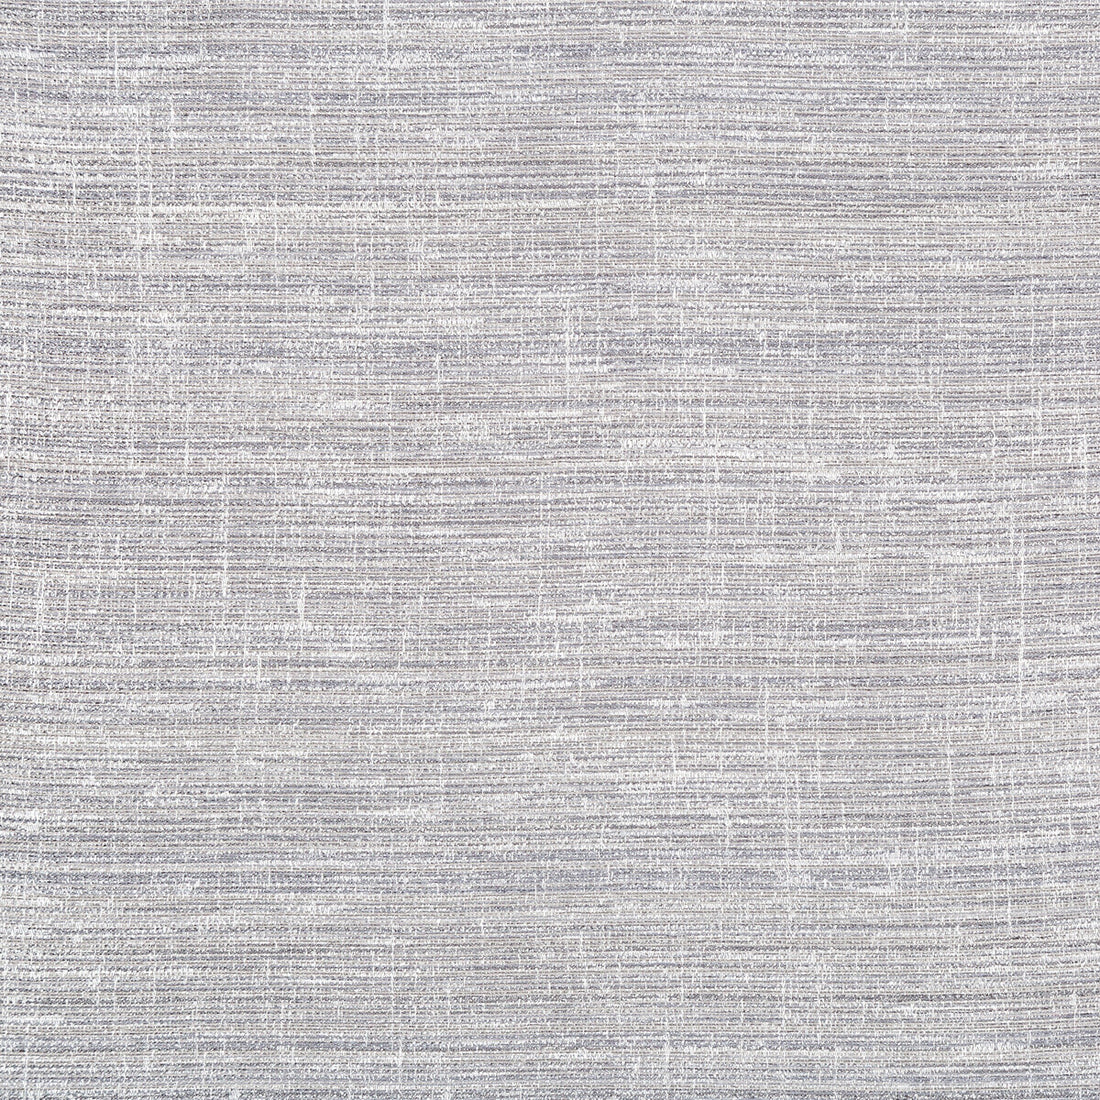 Willa fabric in pewter color - pattern 4662.11.0 - by Kravet Contract in the Kravet Cruise collection